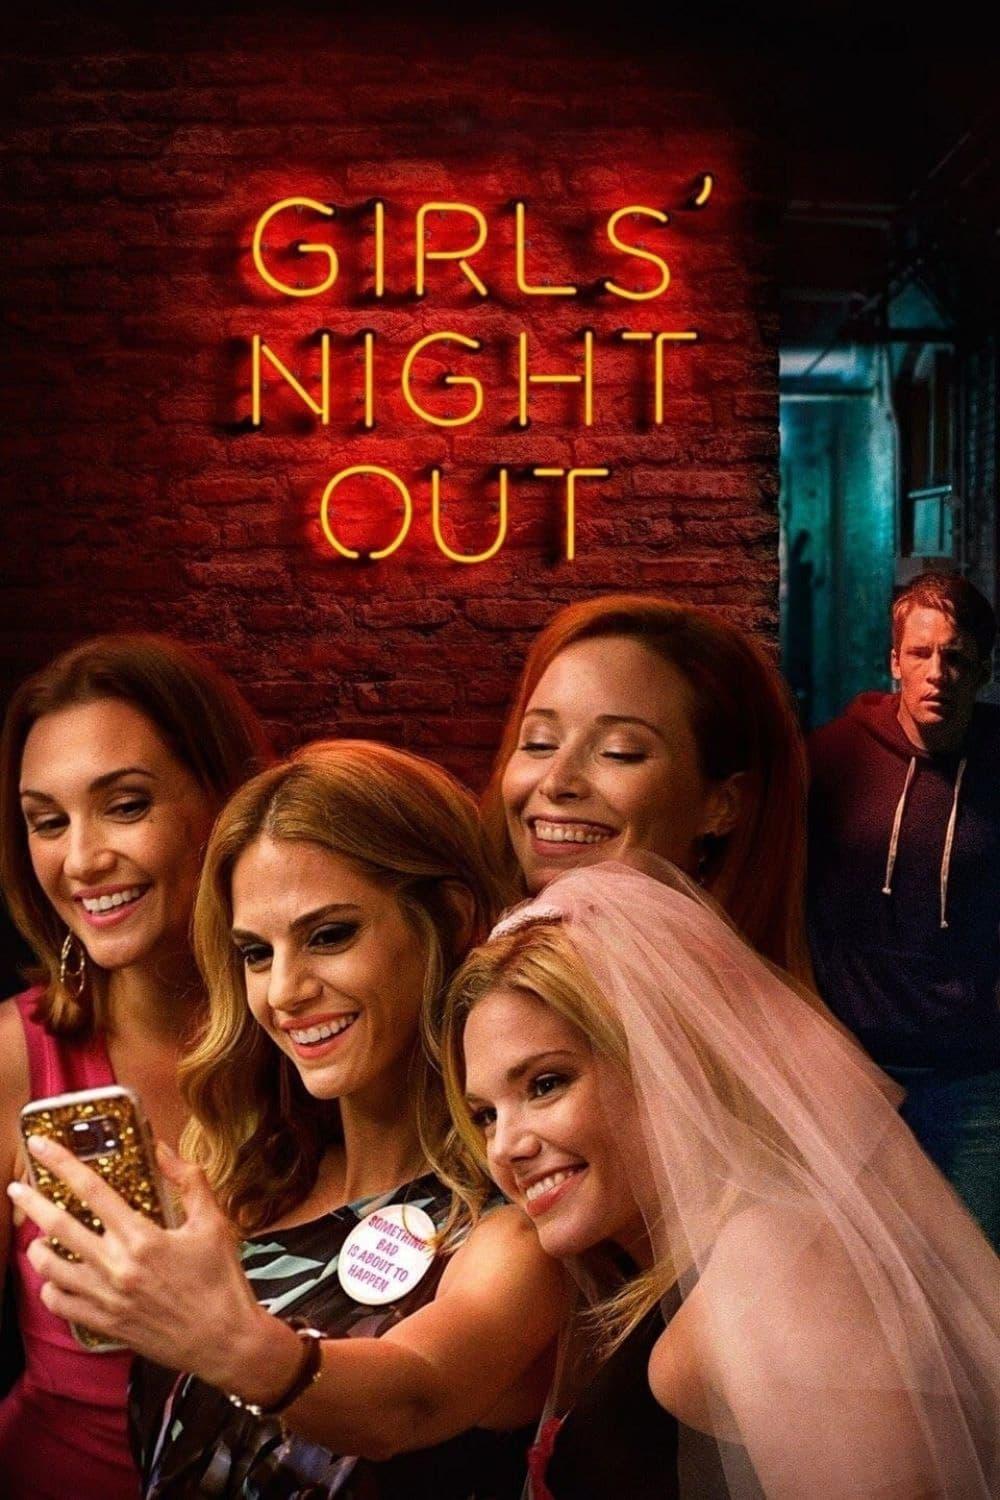 Girls' Night Out poster